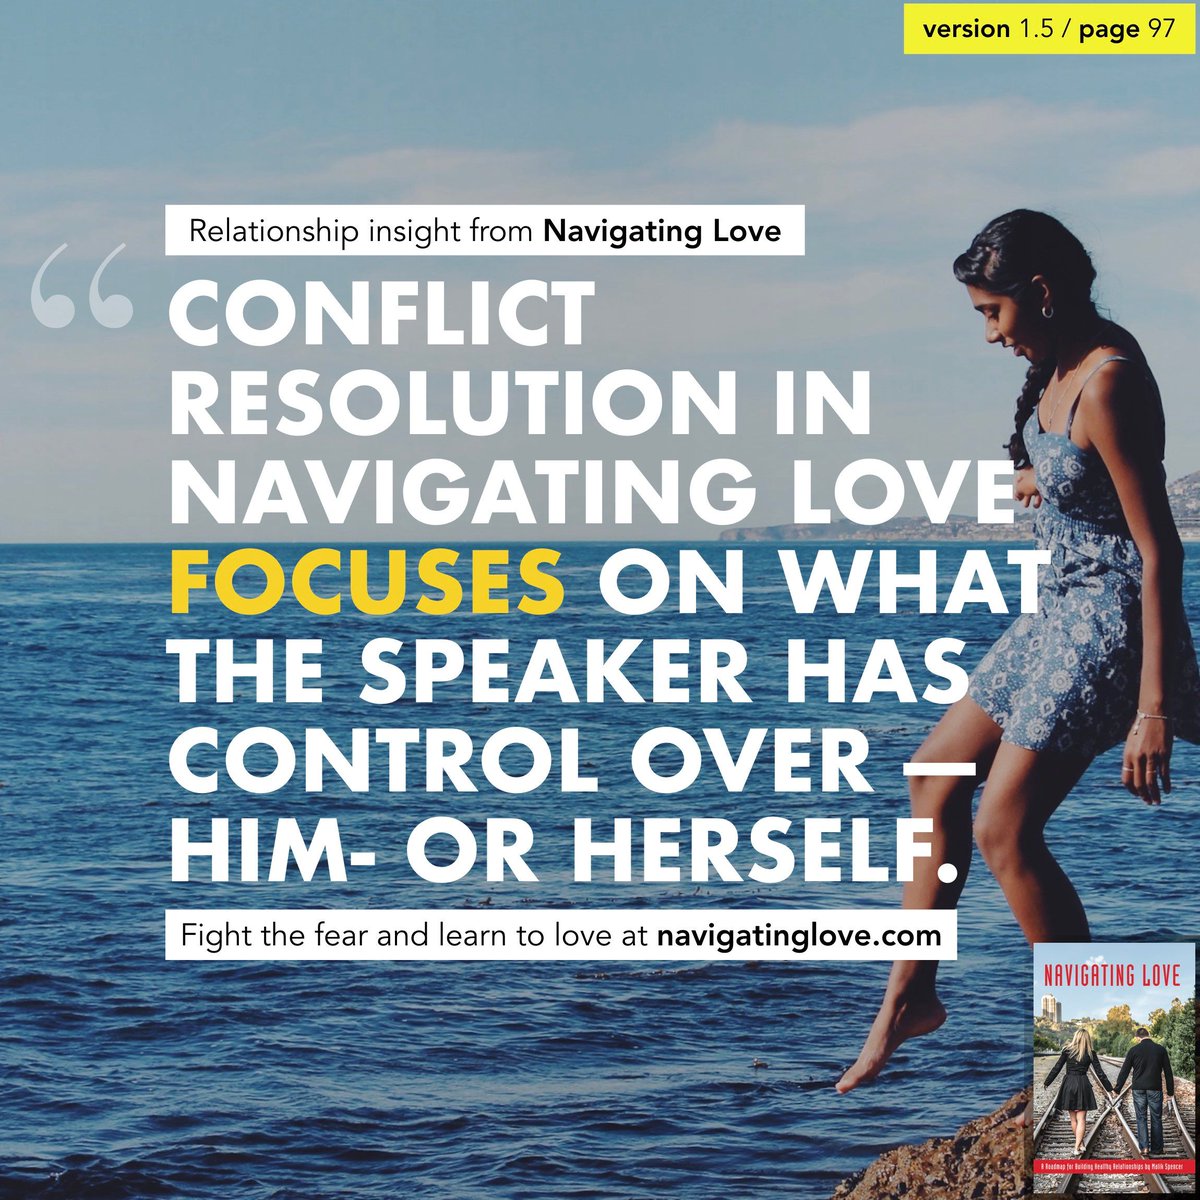 Conflict resolution in Navigating Love focuses on what the speaker has control over — him- or herself. (p.97)